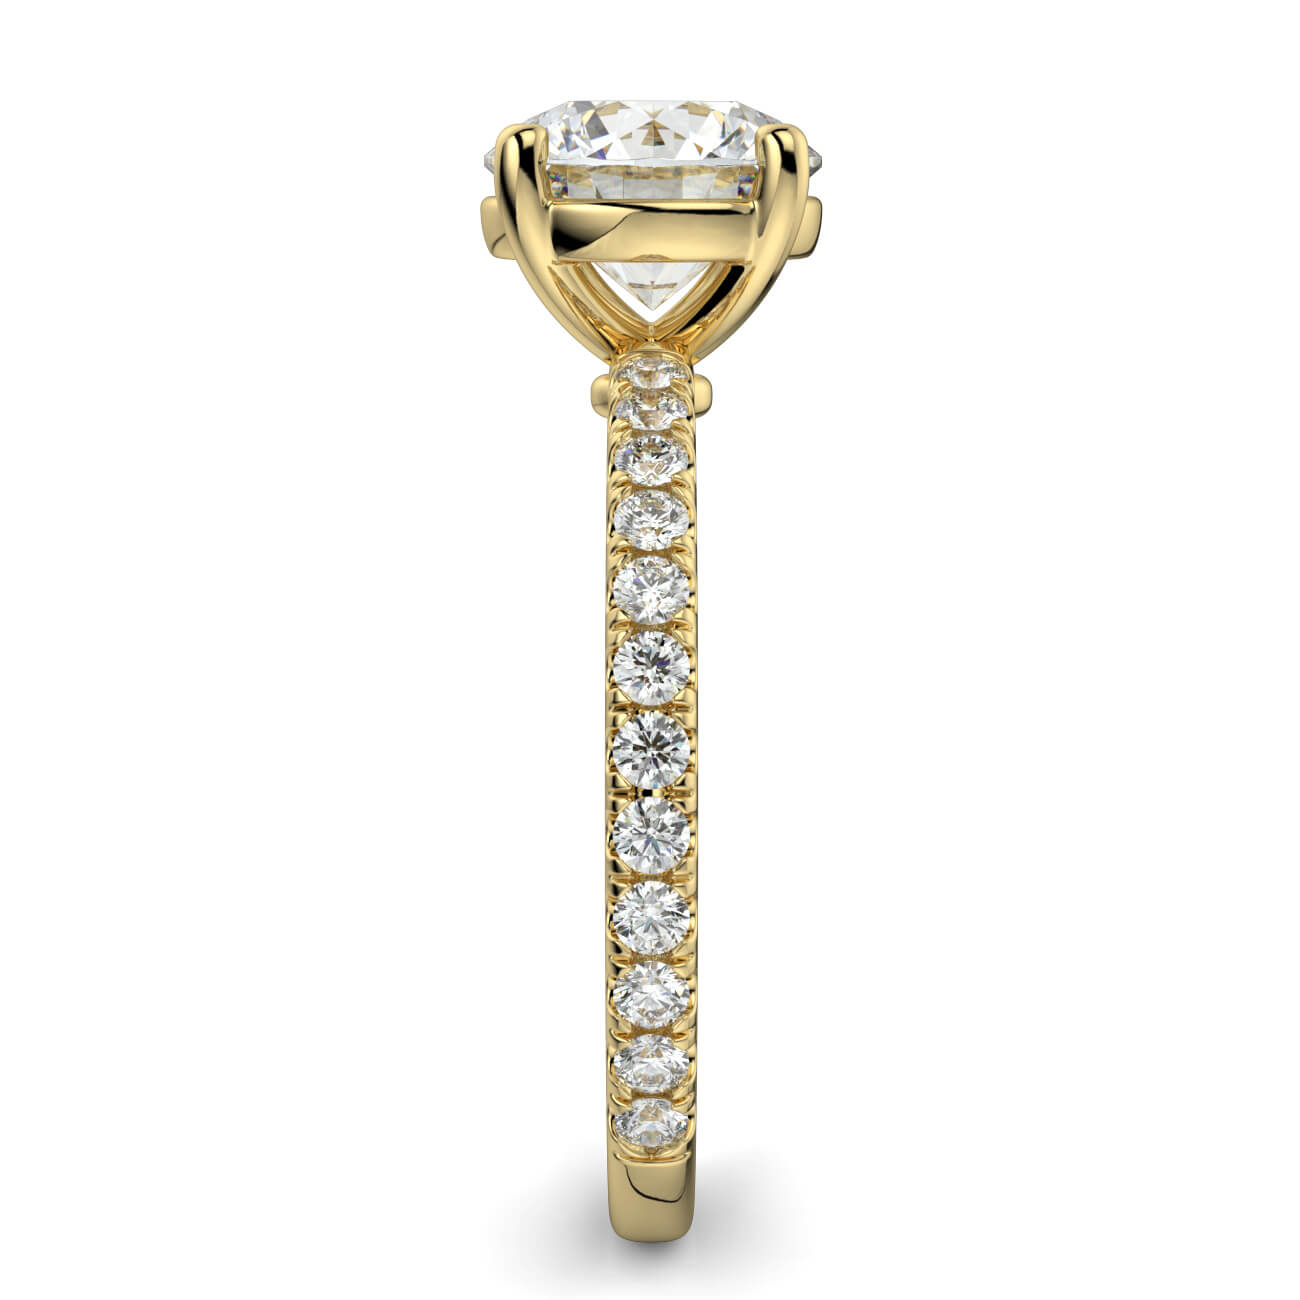 Delicate ‘Liat’ 4 Claw Diamond Engagement Ring in 18k Yellow Gold – Australian Diamond Network